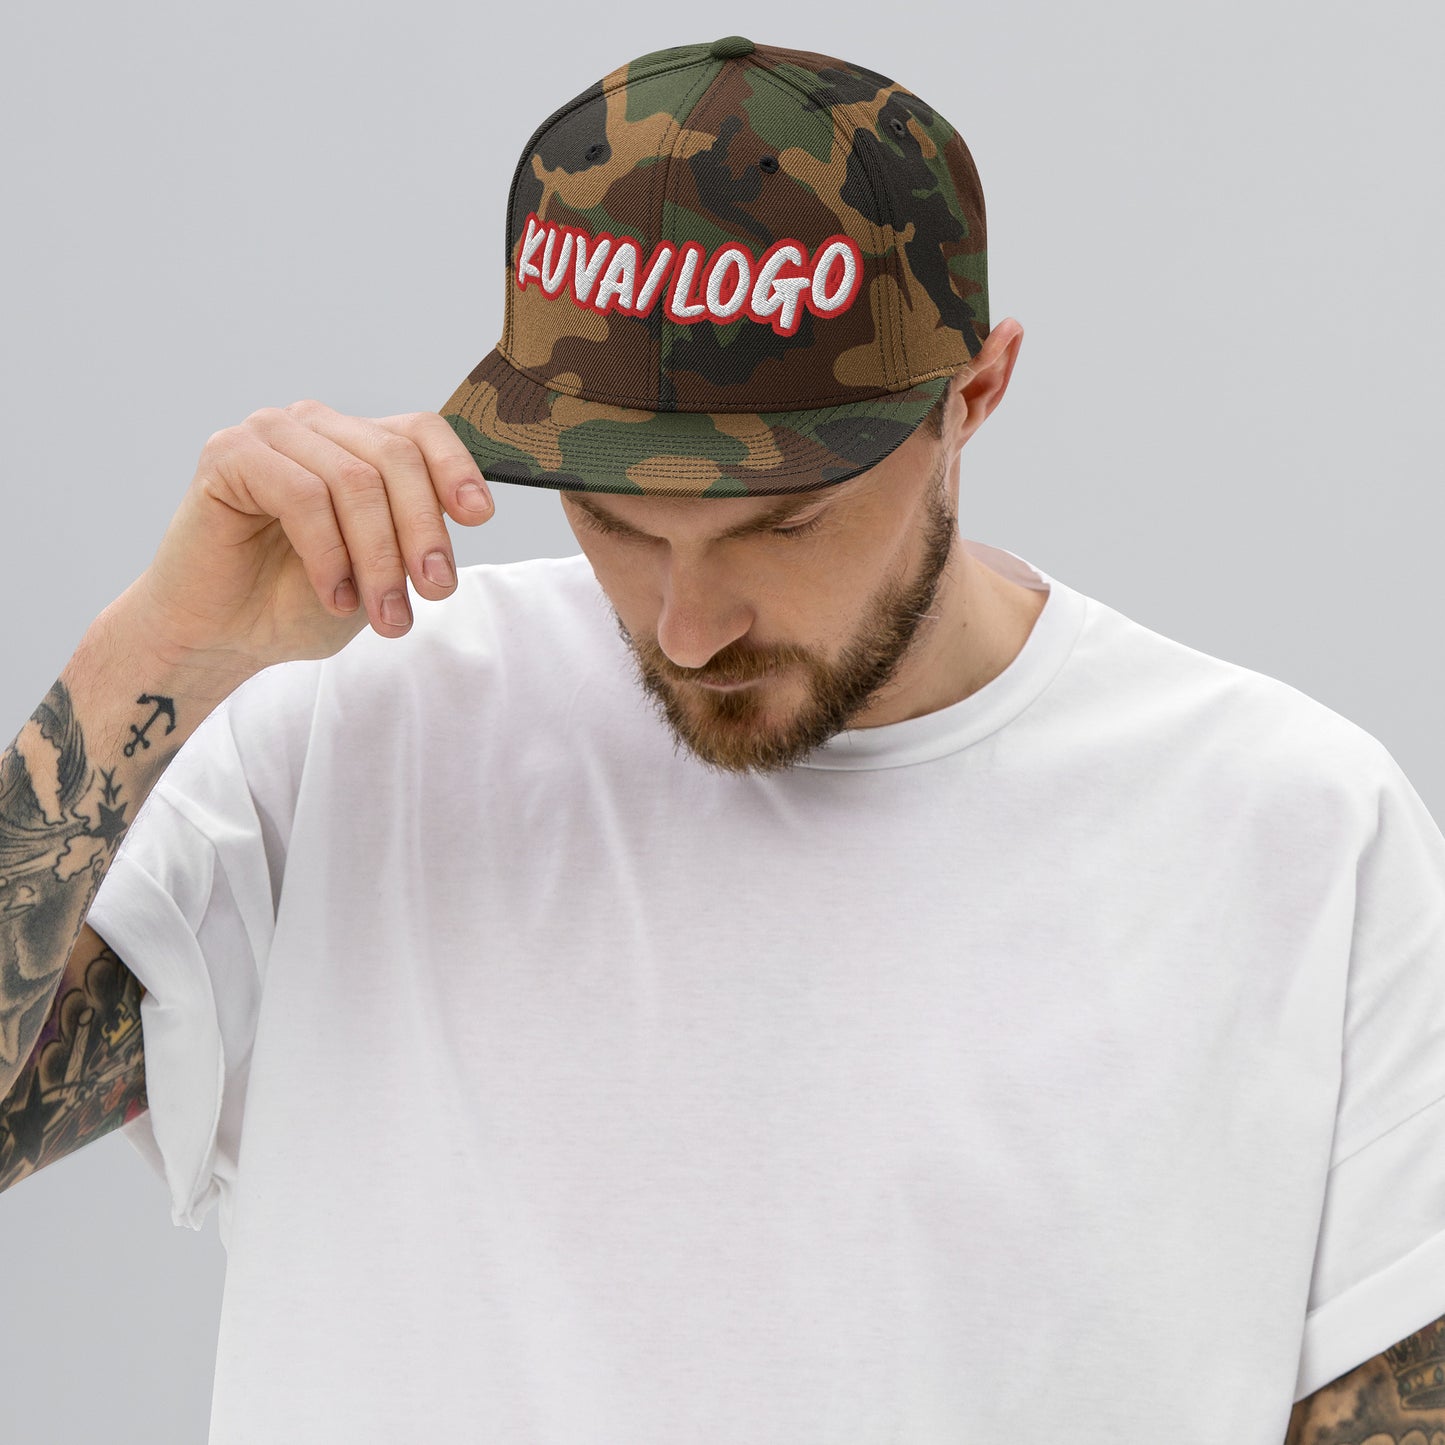 Snapback cap with embroidery